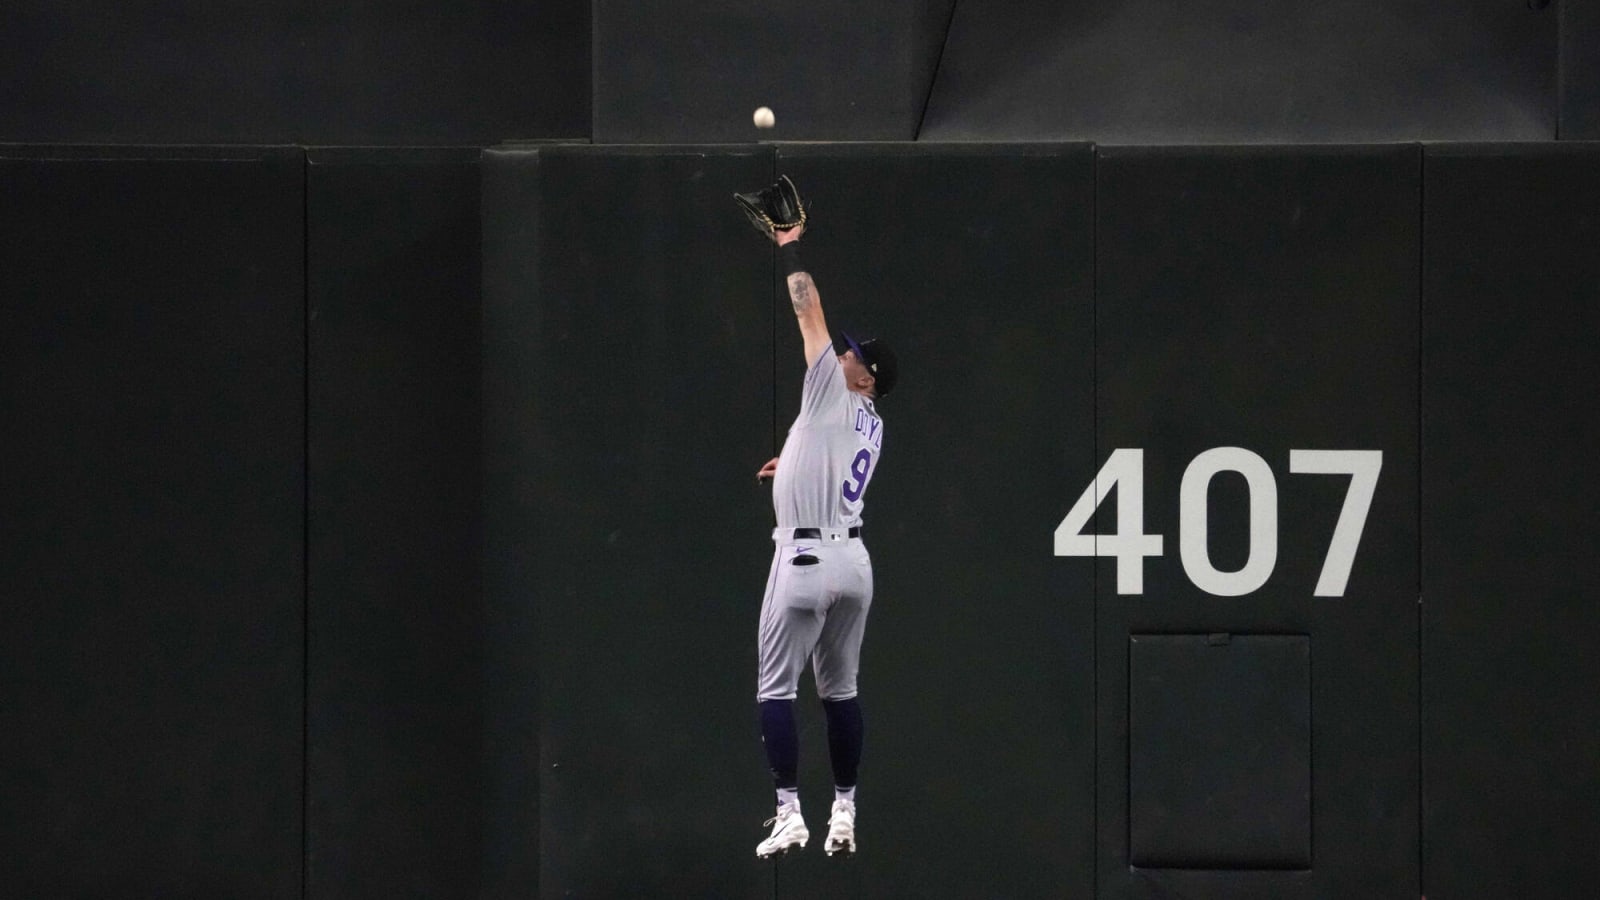 Doyle Rules: Who is the Rockies Exciting New Center Fielder?